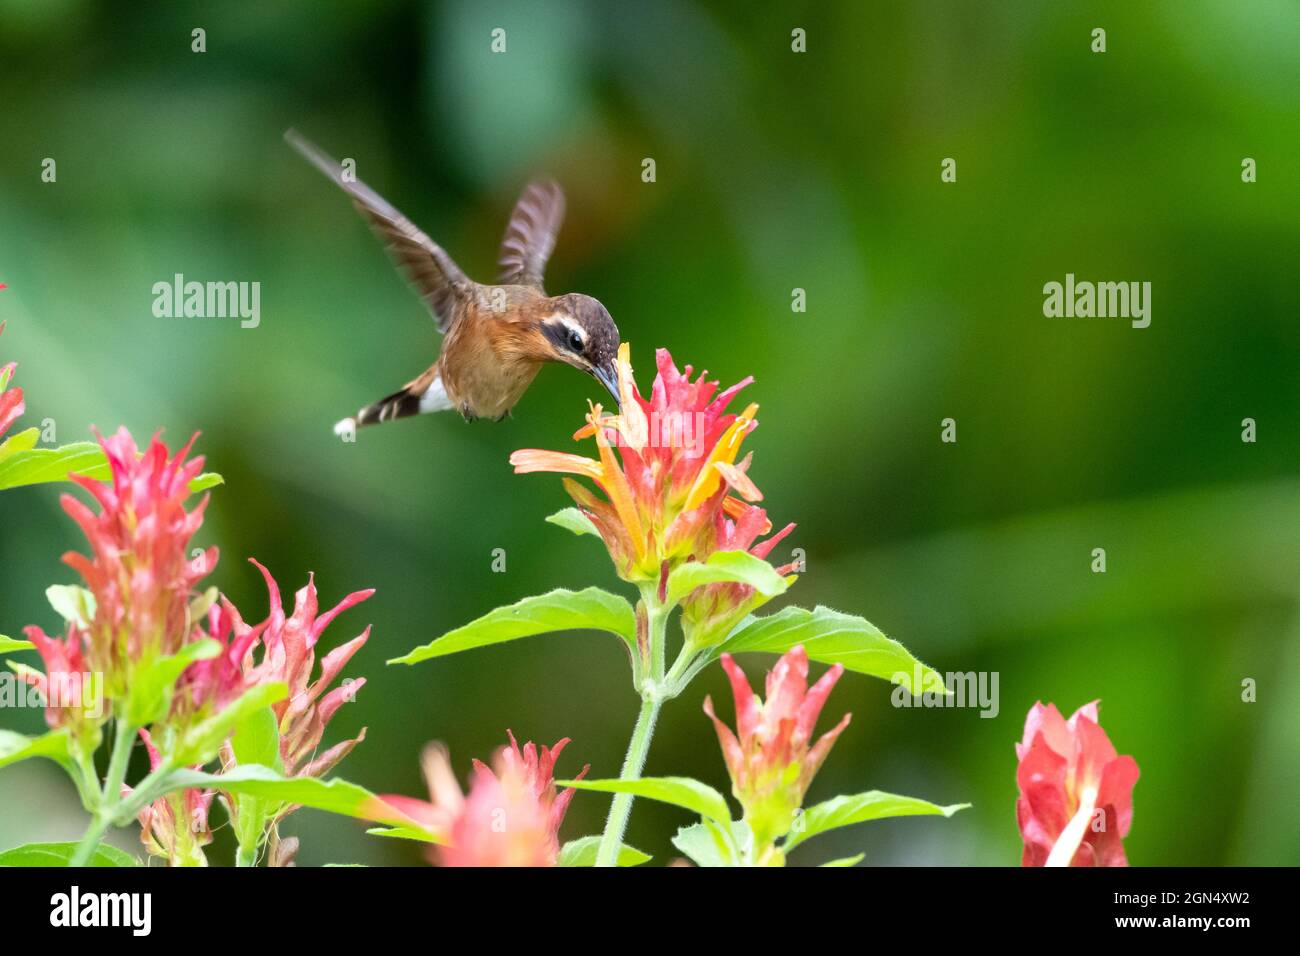 A Little Hermit hummingbird (phaethornis longuemareus), feeding on a Shrimp Plant surrounded by tropical flowers with a green background. Stock Photo